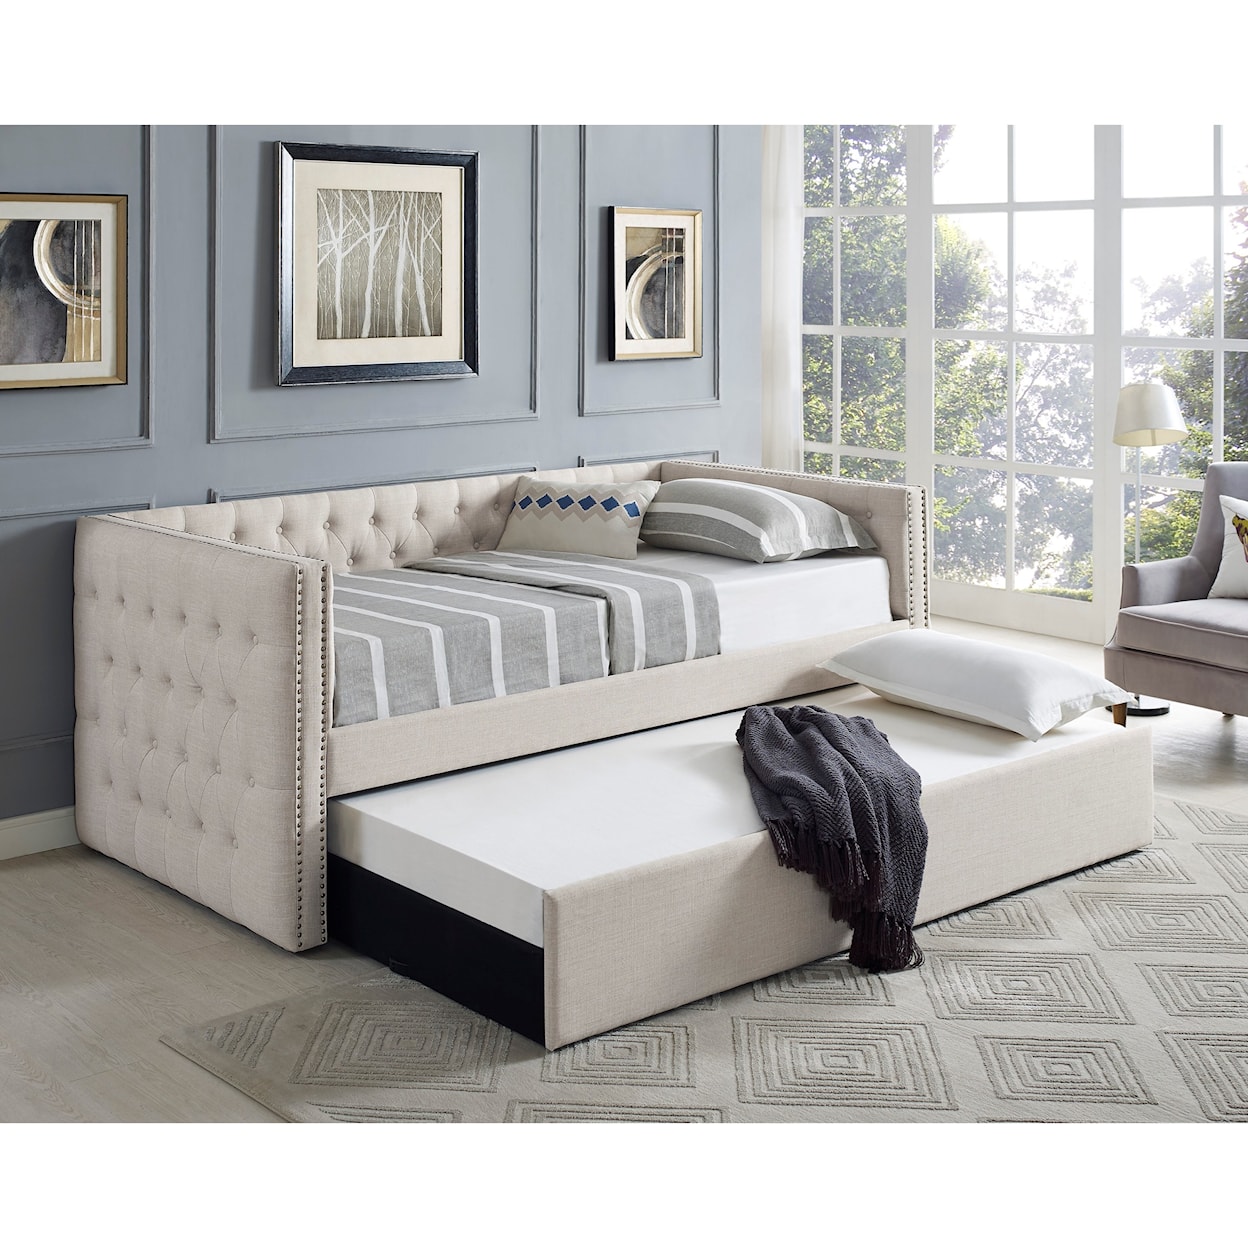 CM 5335 Navy Daybed